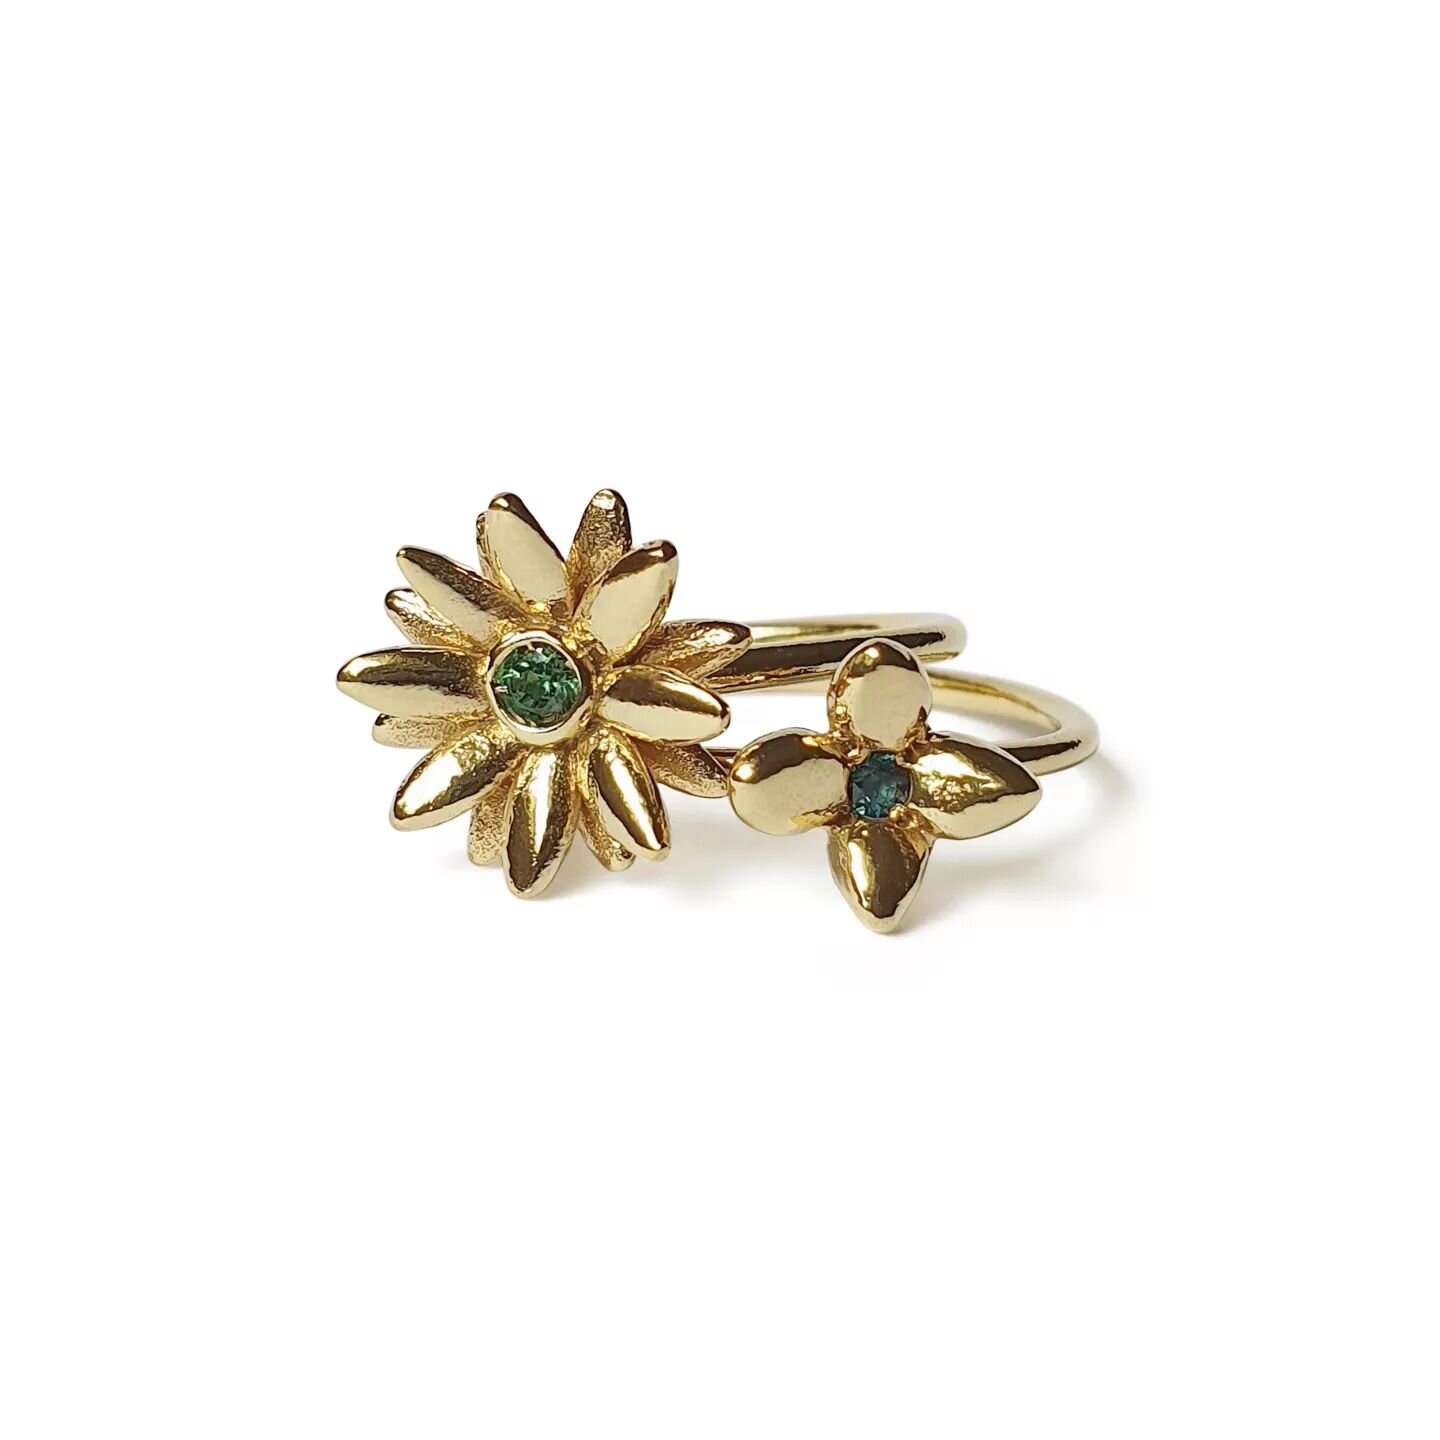 SINGLE FLOWER POWER rings
A cute pair
🌼💍🌸 

GOLD Daisy &amp; Lilac ring
with green tourmalines 

#18ctgold #14ctgold #9ctgold #daisy #lilac #goldrings #bling #jewelry #floral #fancy #giftideas #handmadejewelry #goldring #engagementrings #goldjewel